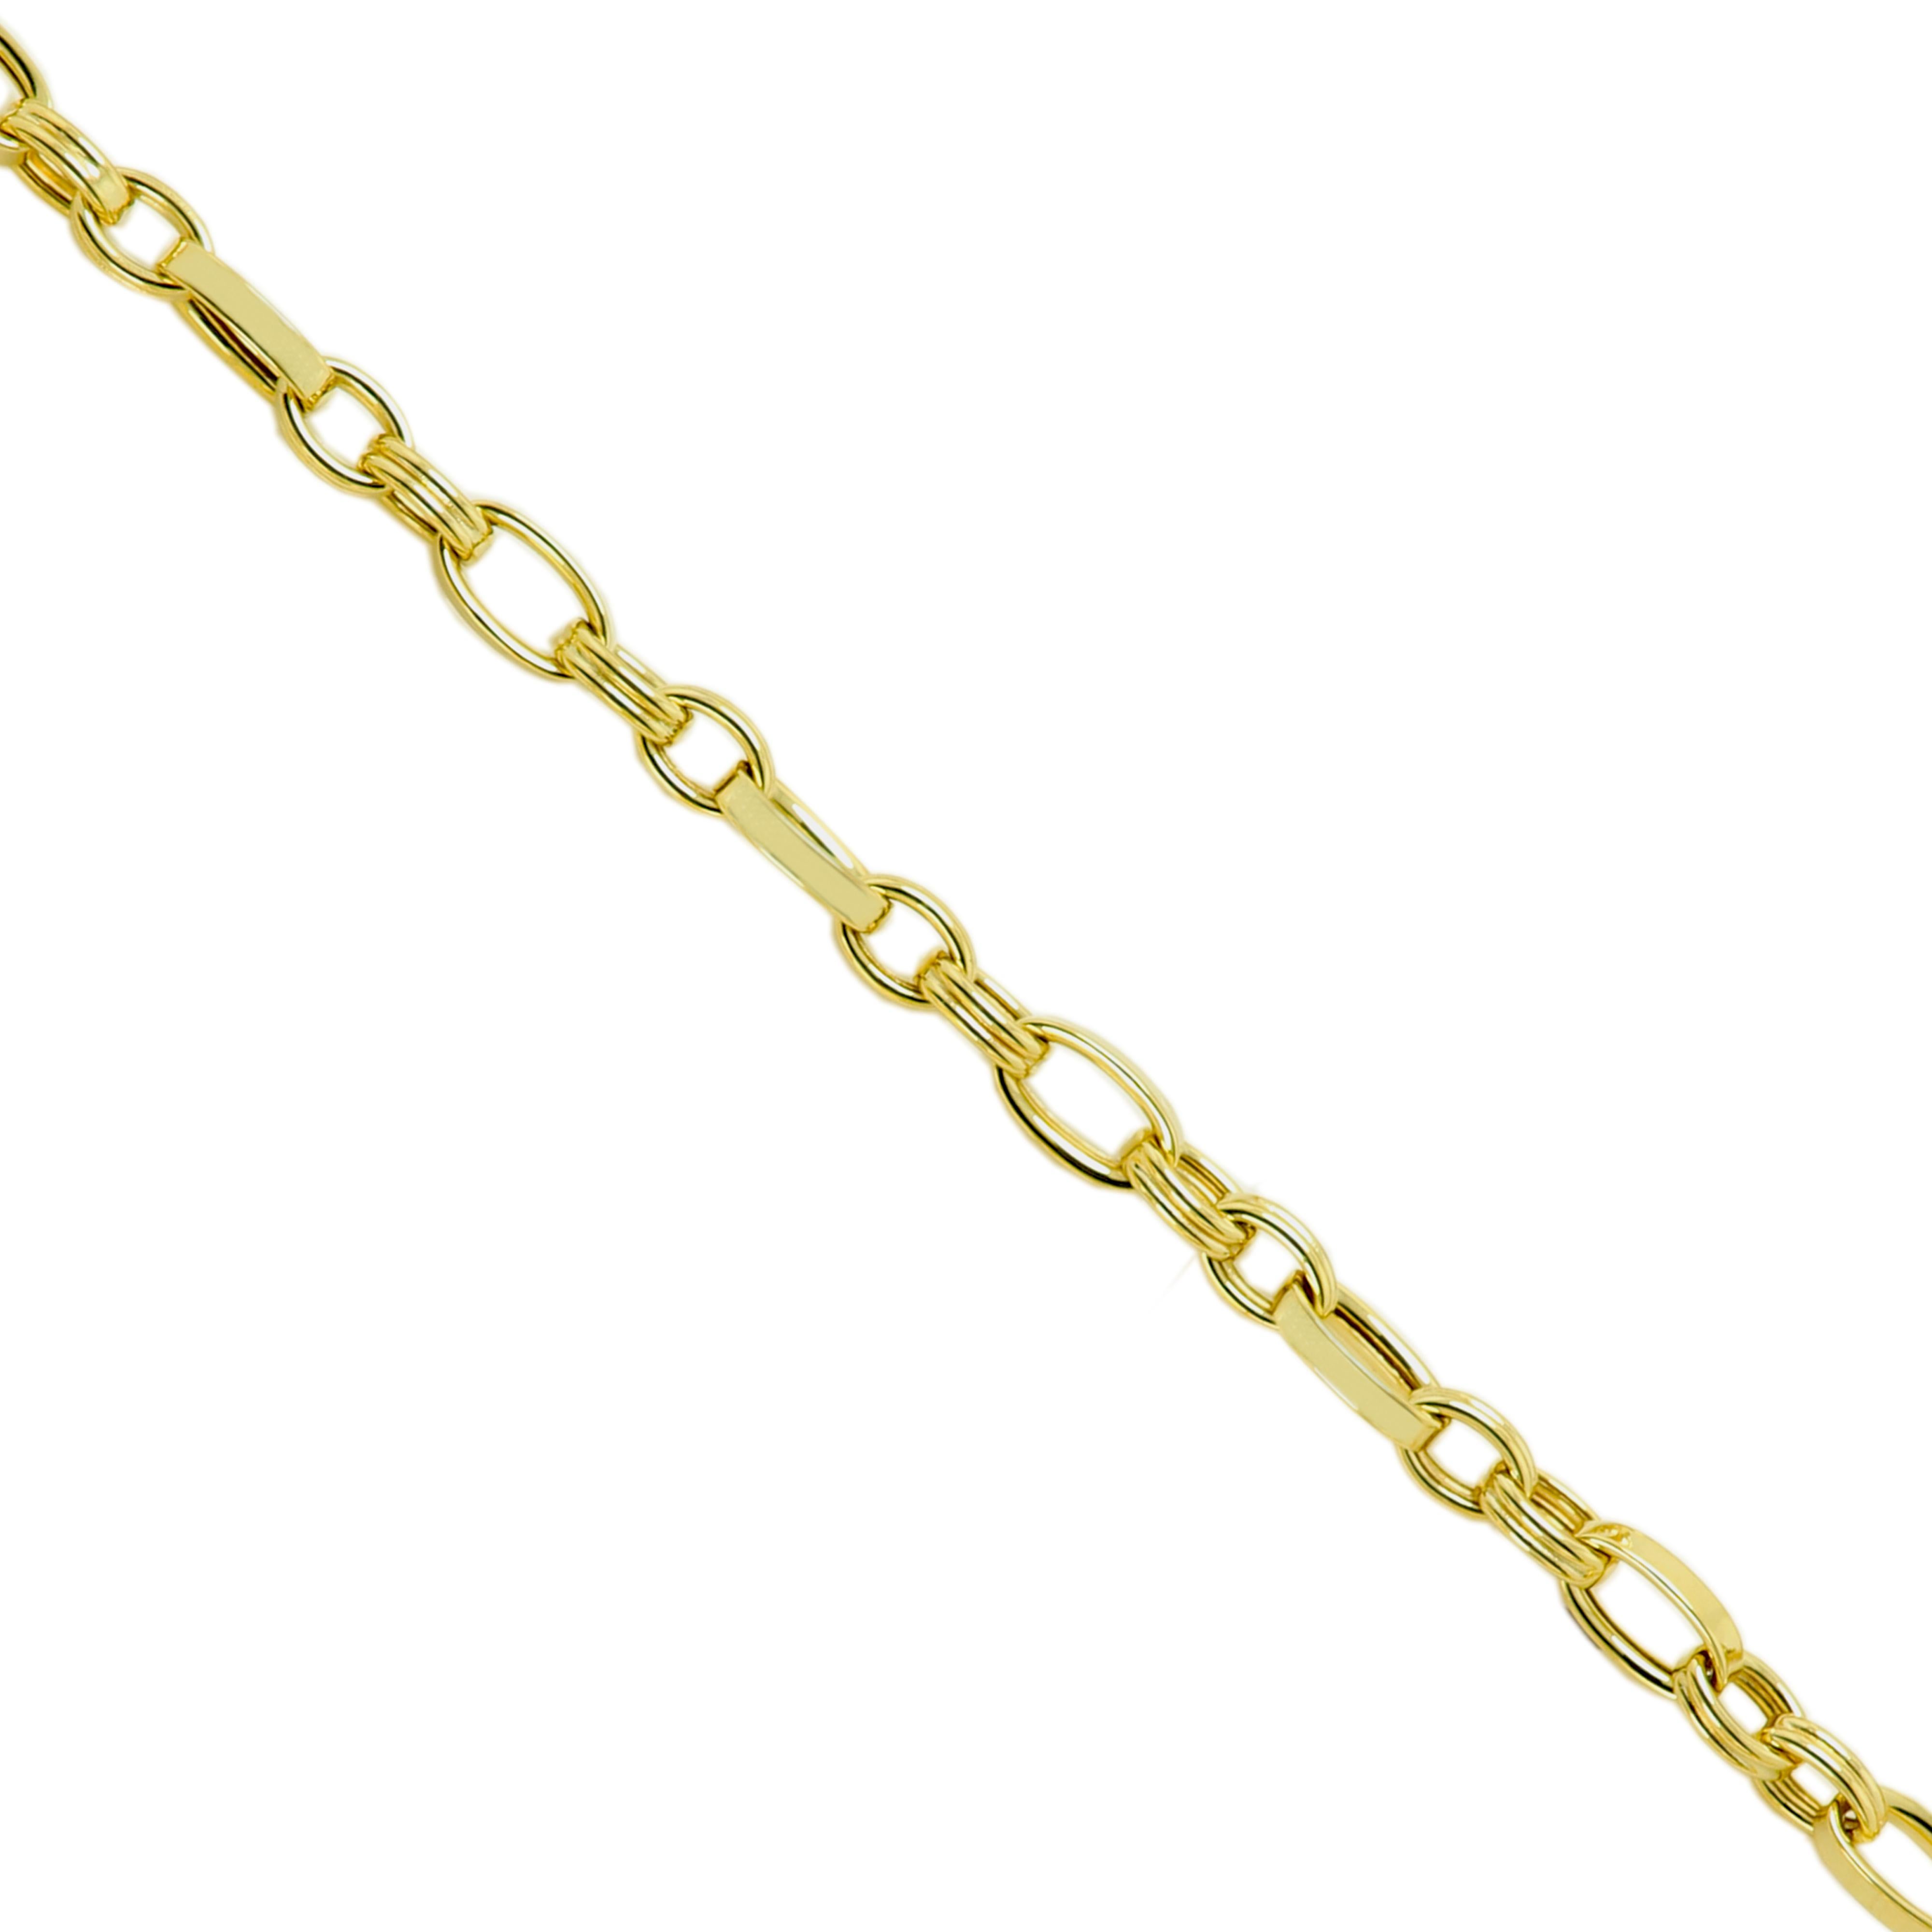 Beautiful Link Bracelet -  well made and very trendy look.
very elegant, Has a good balance between elegancy and trendy, not too bulky but not too thin either.
14k yellow gold 5.20 grams.
Length; 7.5' Inch
made In Italy.
approx individual link size